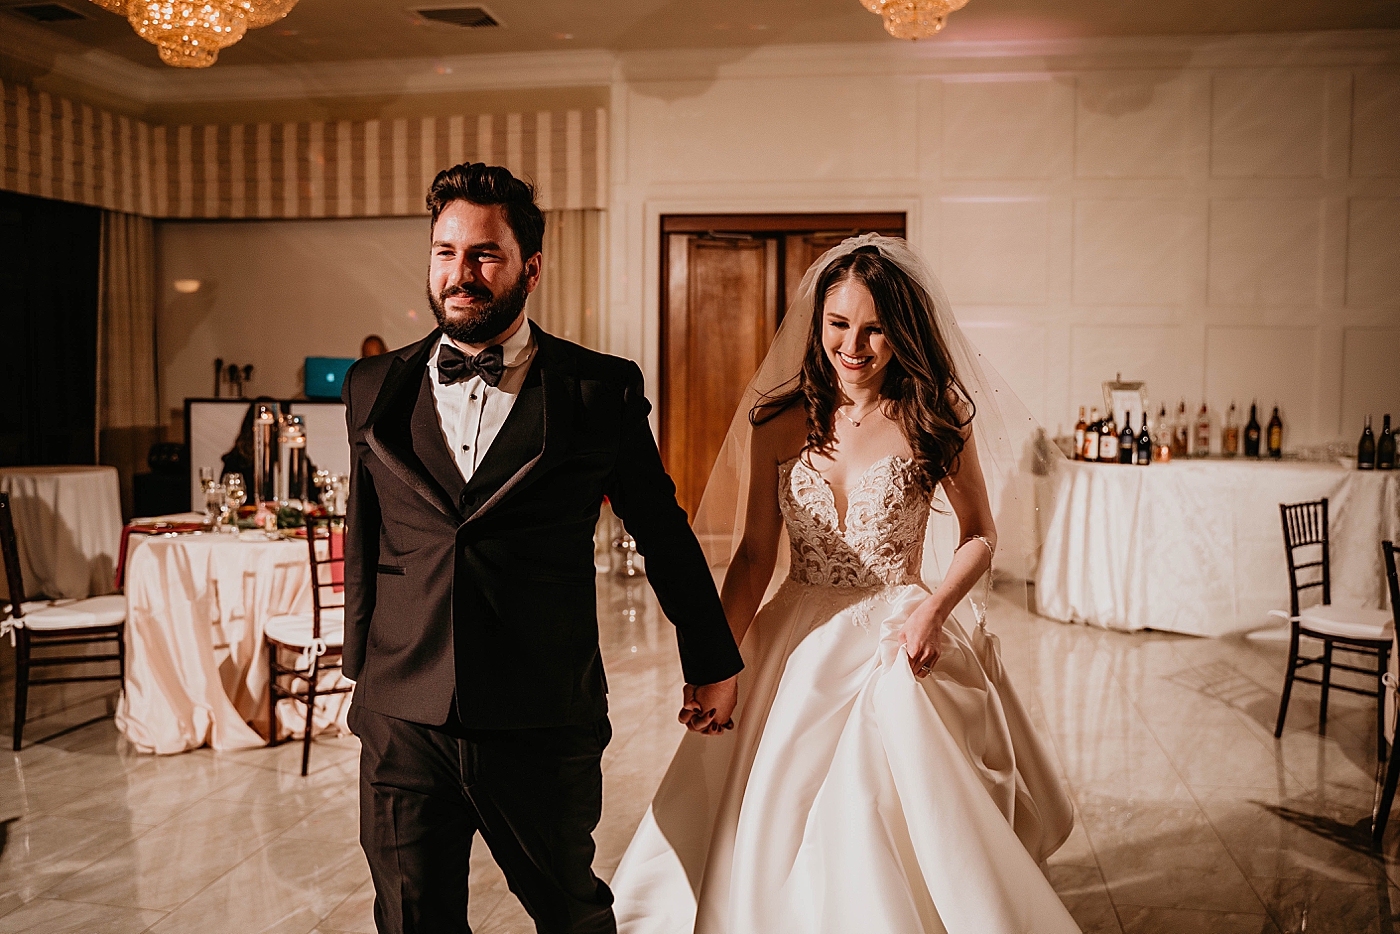 Bride and Groom entering First Dance at Ceremony with bar behind them Romantic Winter Wedding captured NYC Wedding Planner Poppy and Lynn